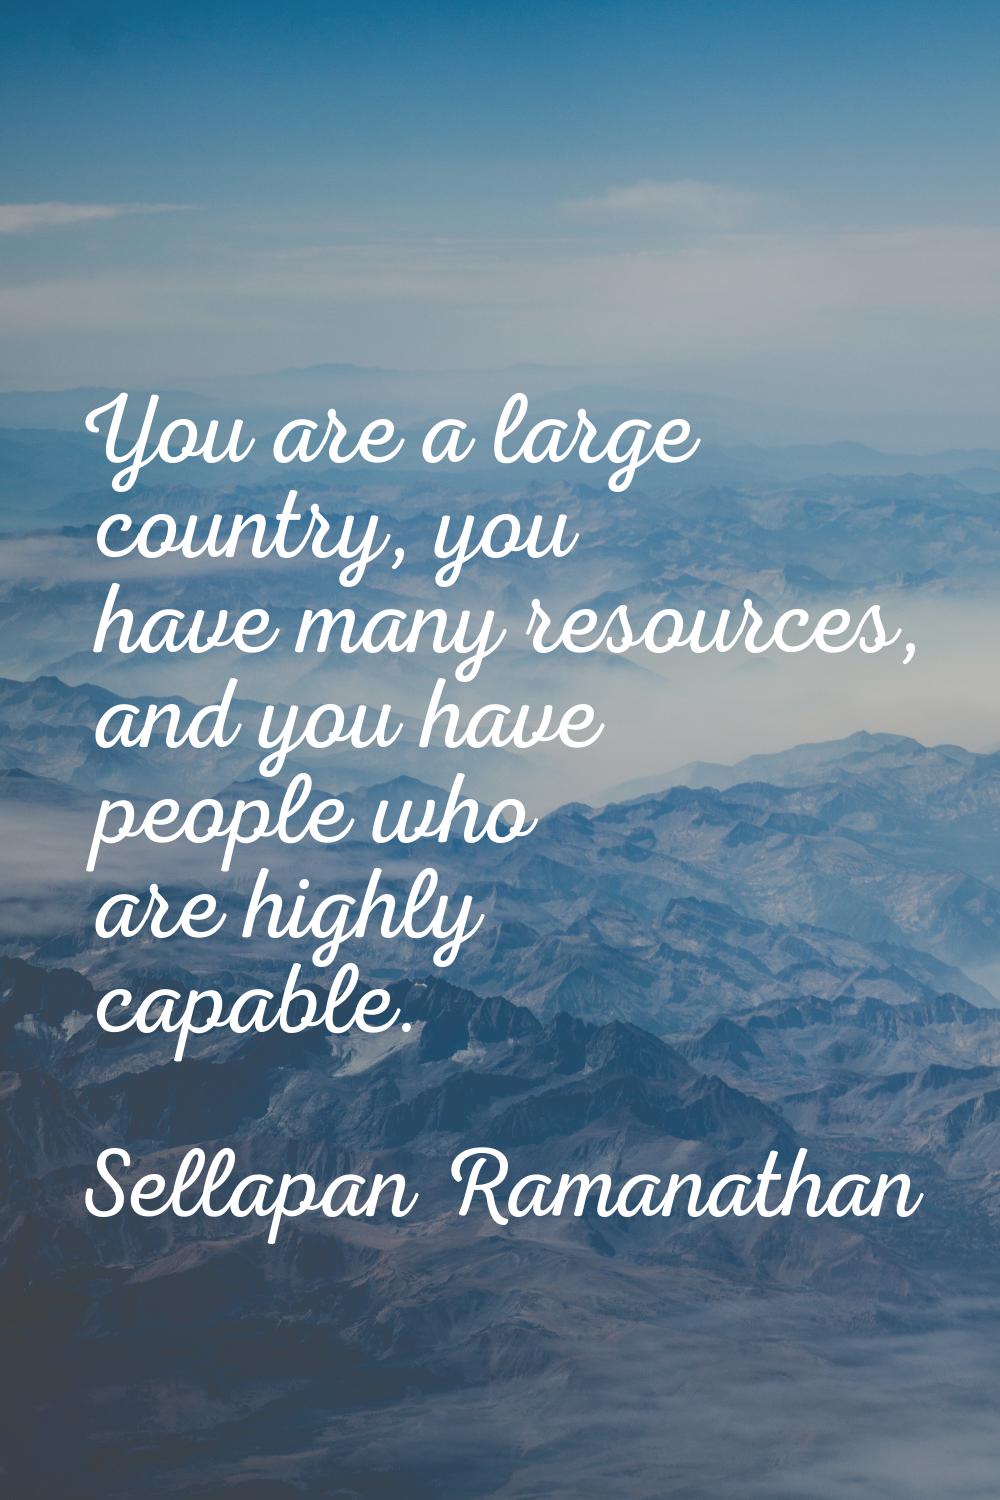 You are a large country, you have many resources, and you have people who are highly capable.